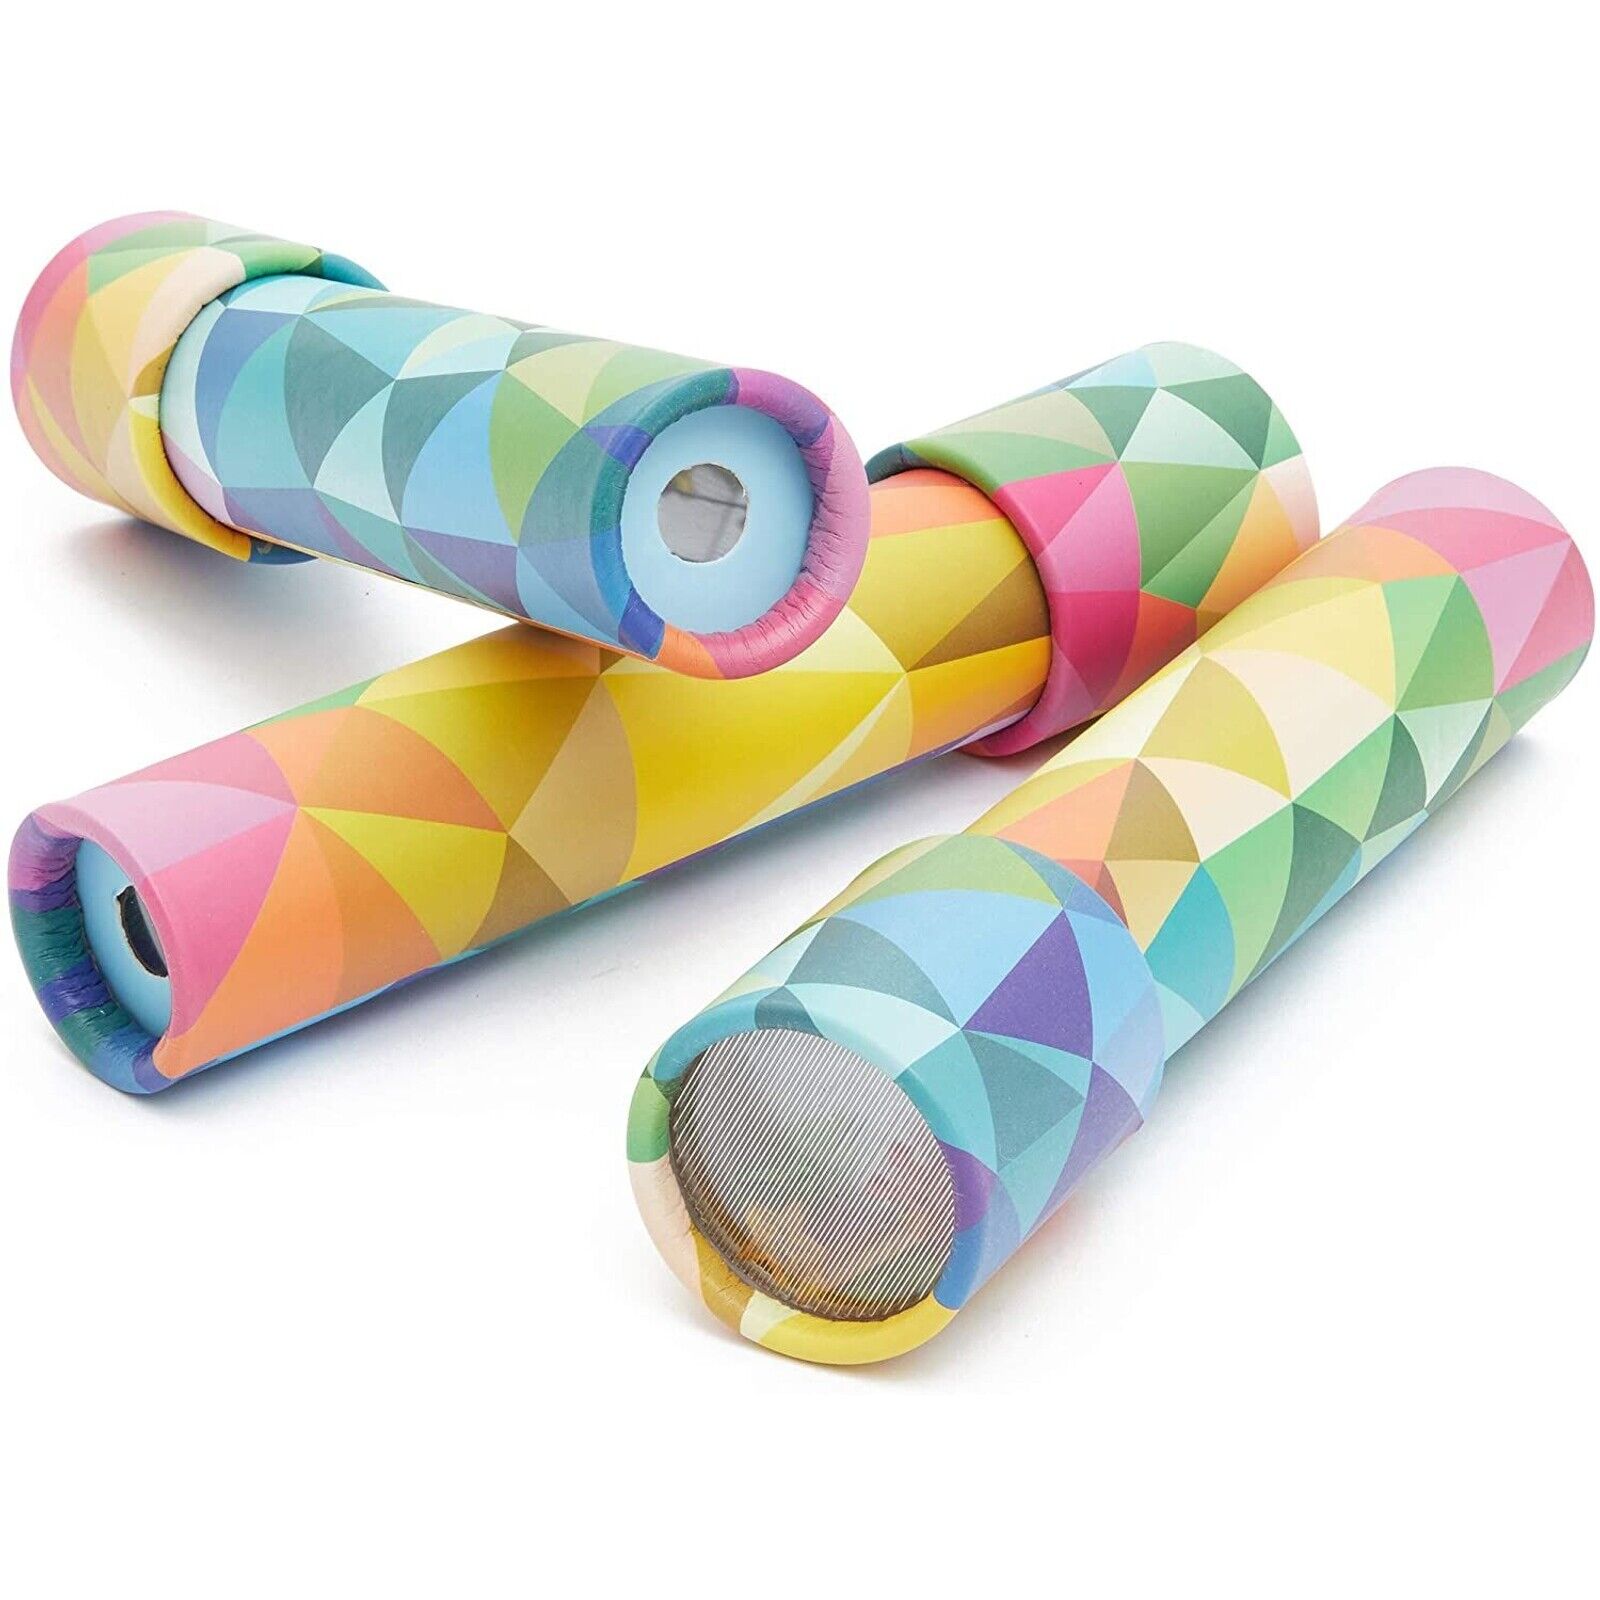 3 Pack Prism Kaleidoscopes for Kids (Geometric Design, 8x1.3 In)